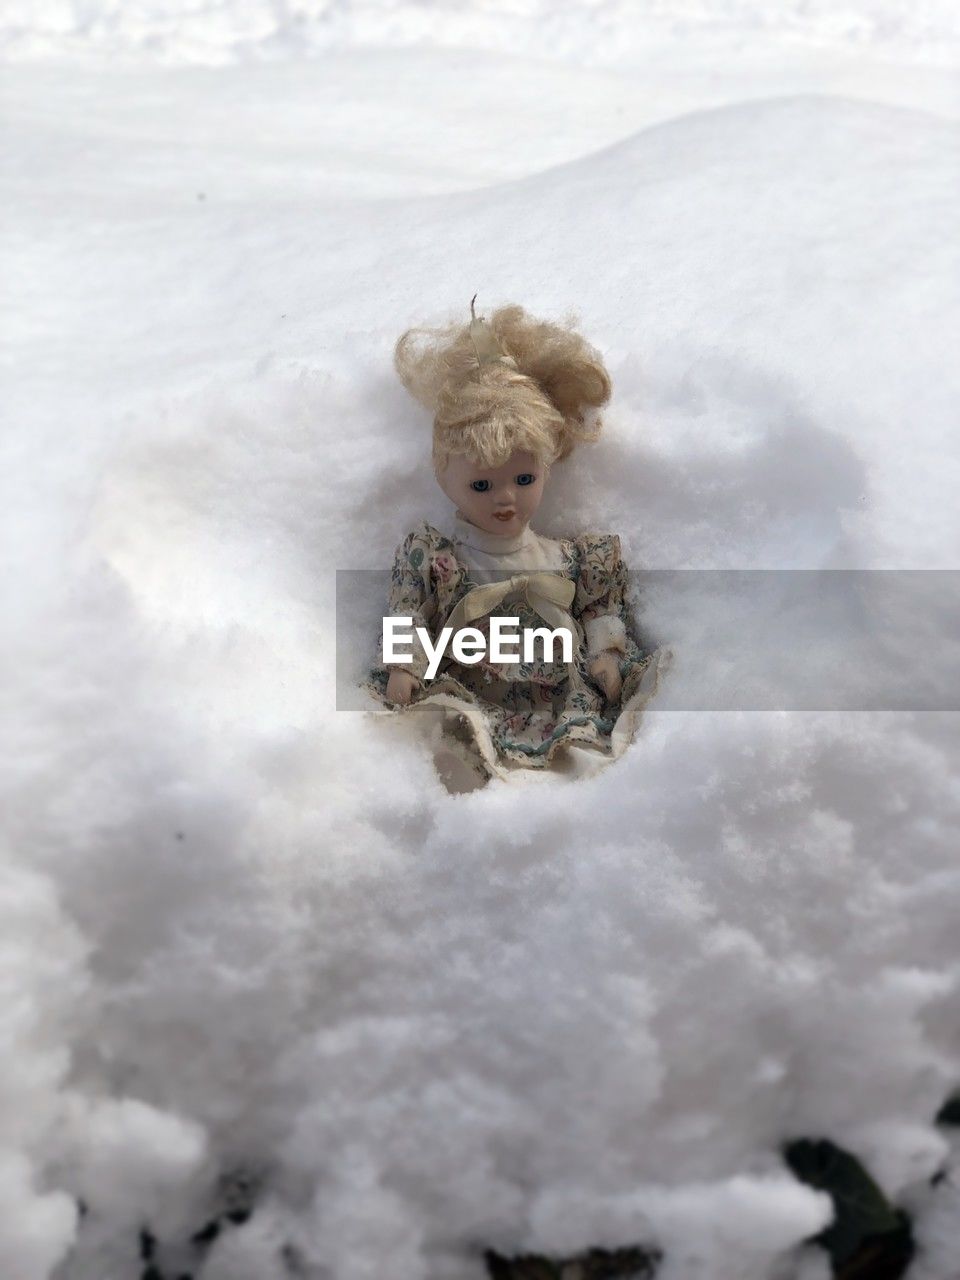 snow, winter, cold temperature, childhood, nature, teddy bear, toy, stuffed toy, day, representation, child, storm, fun, white, outdoors, freezing